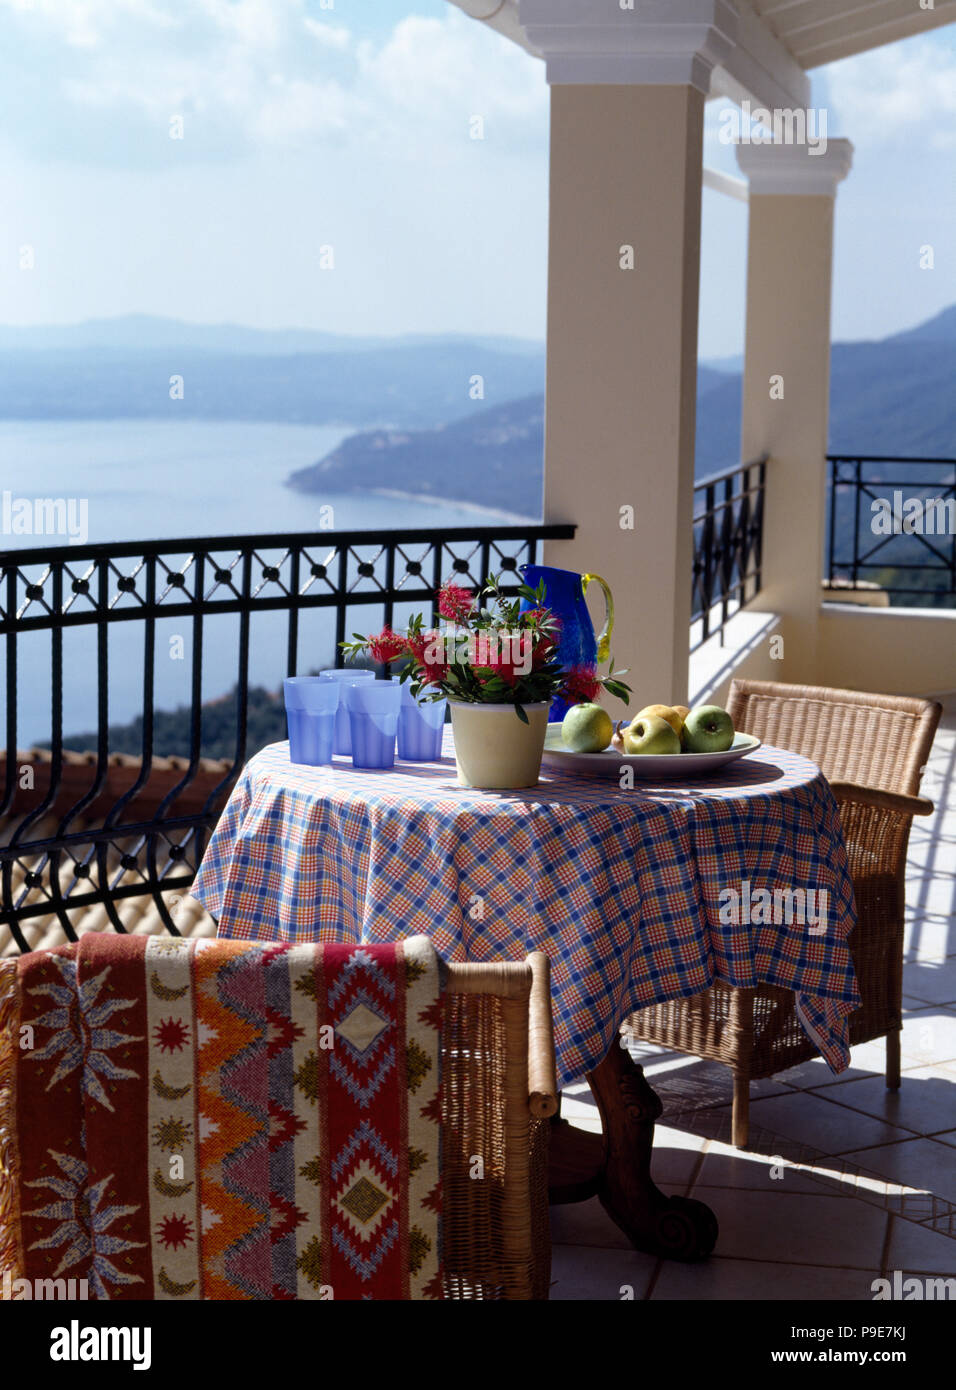 Blue glass jug on table with checked cloth on balcony of a villa overlooking the ocean Stock Photo